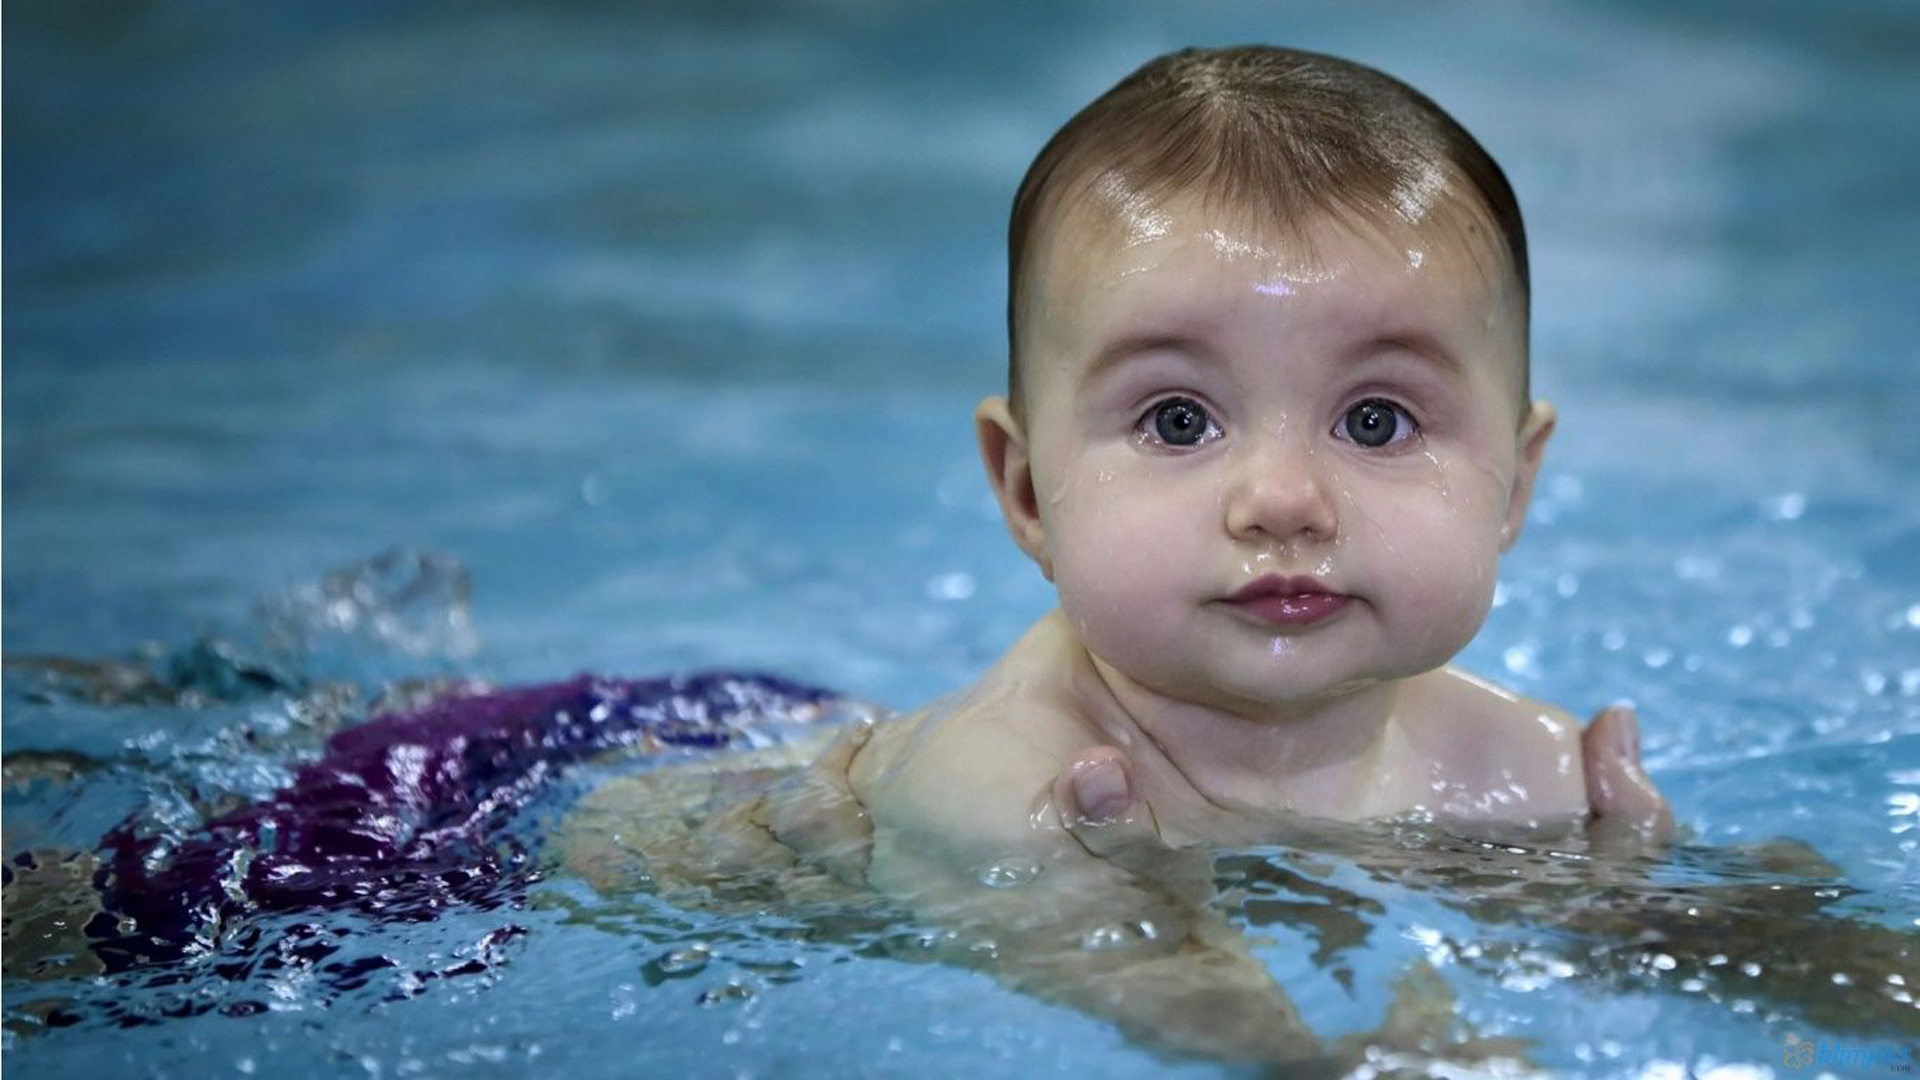 Cute Baby Is Swimming On Body Of Water Wearing Purple Shorts In A Blur